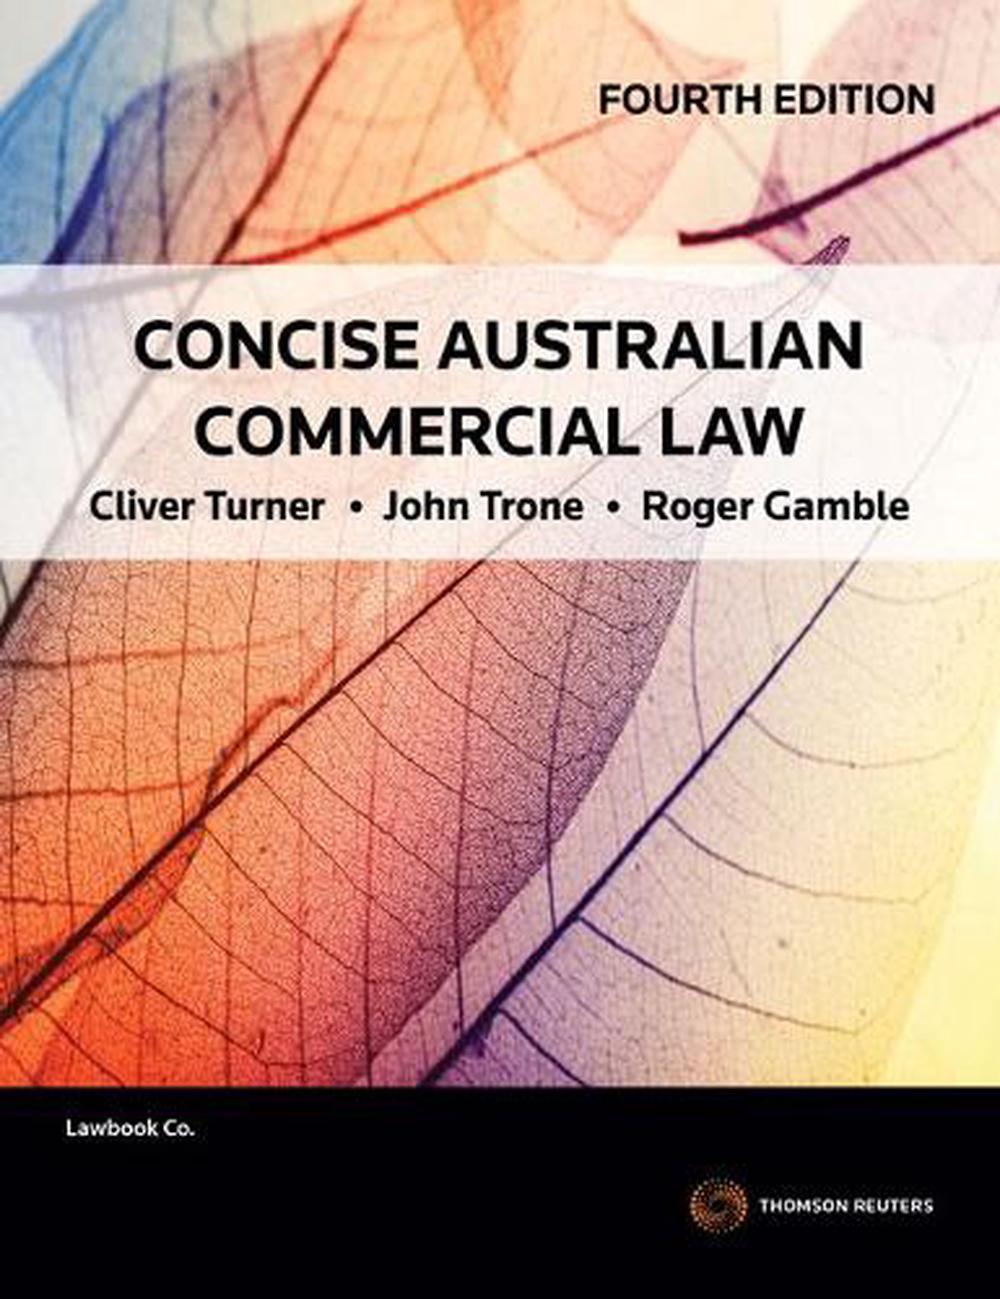 concise australian commercial law pdf free